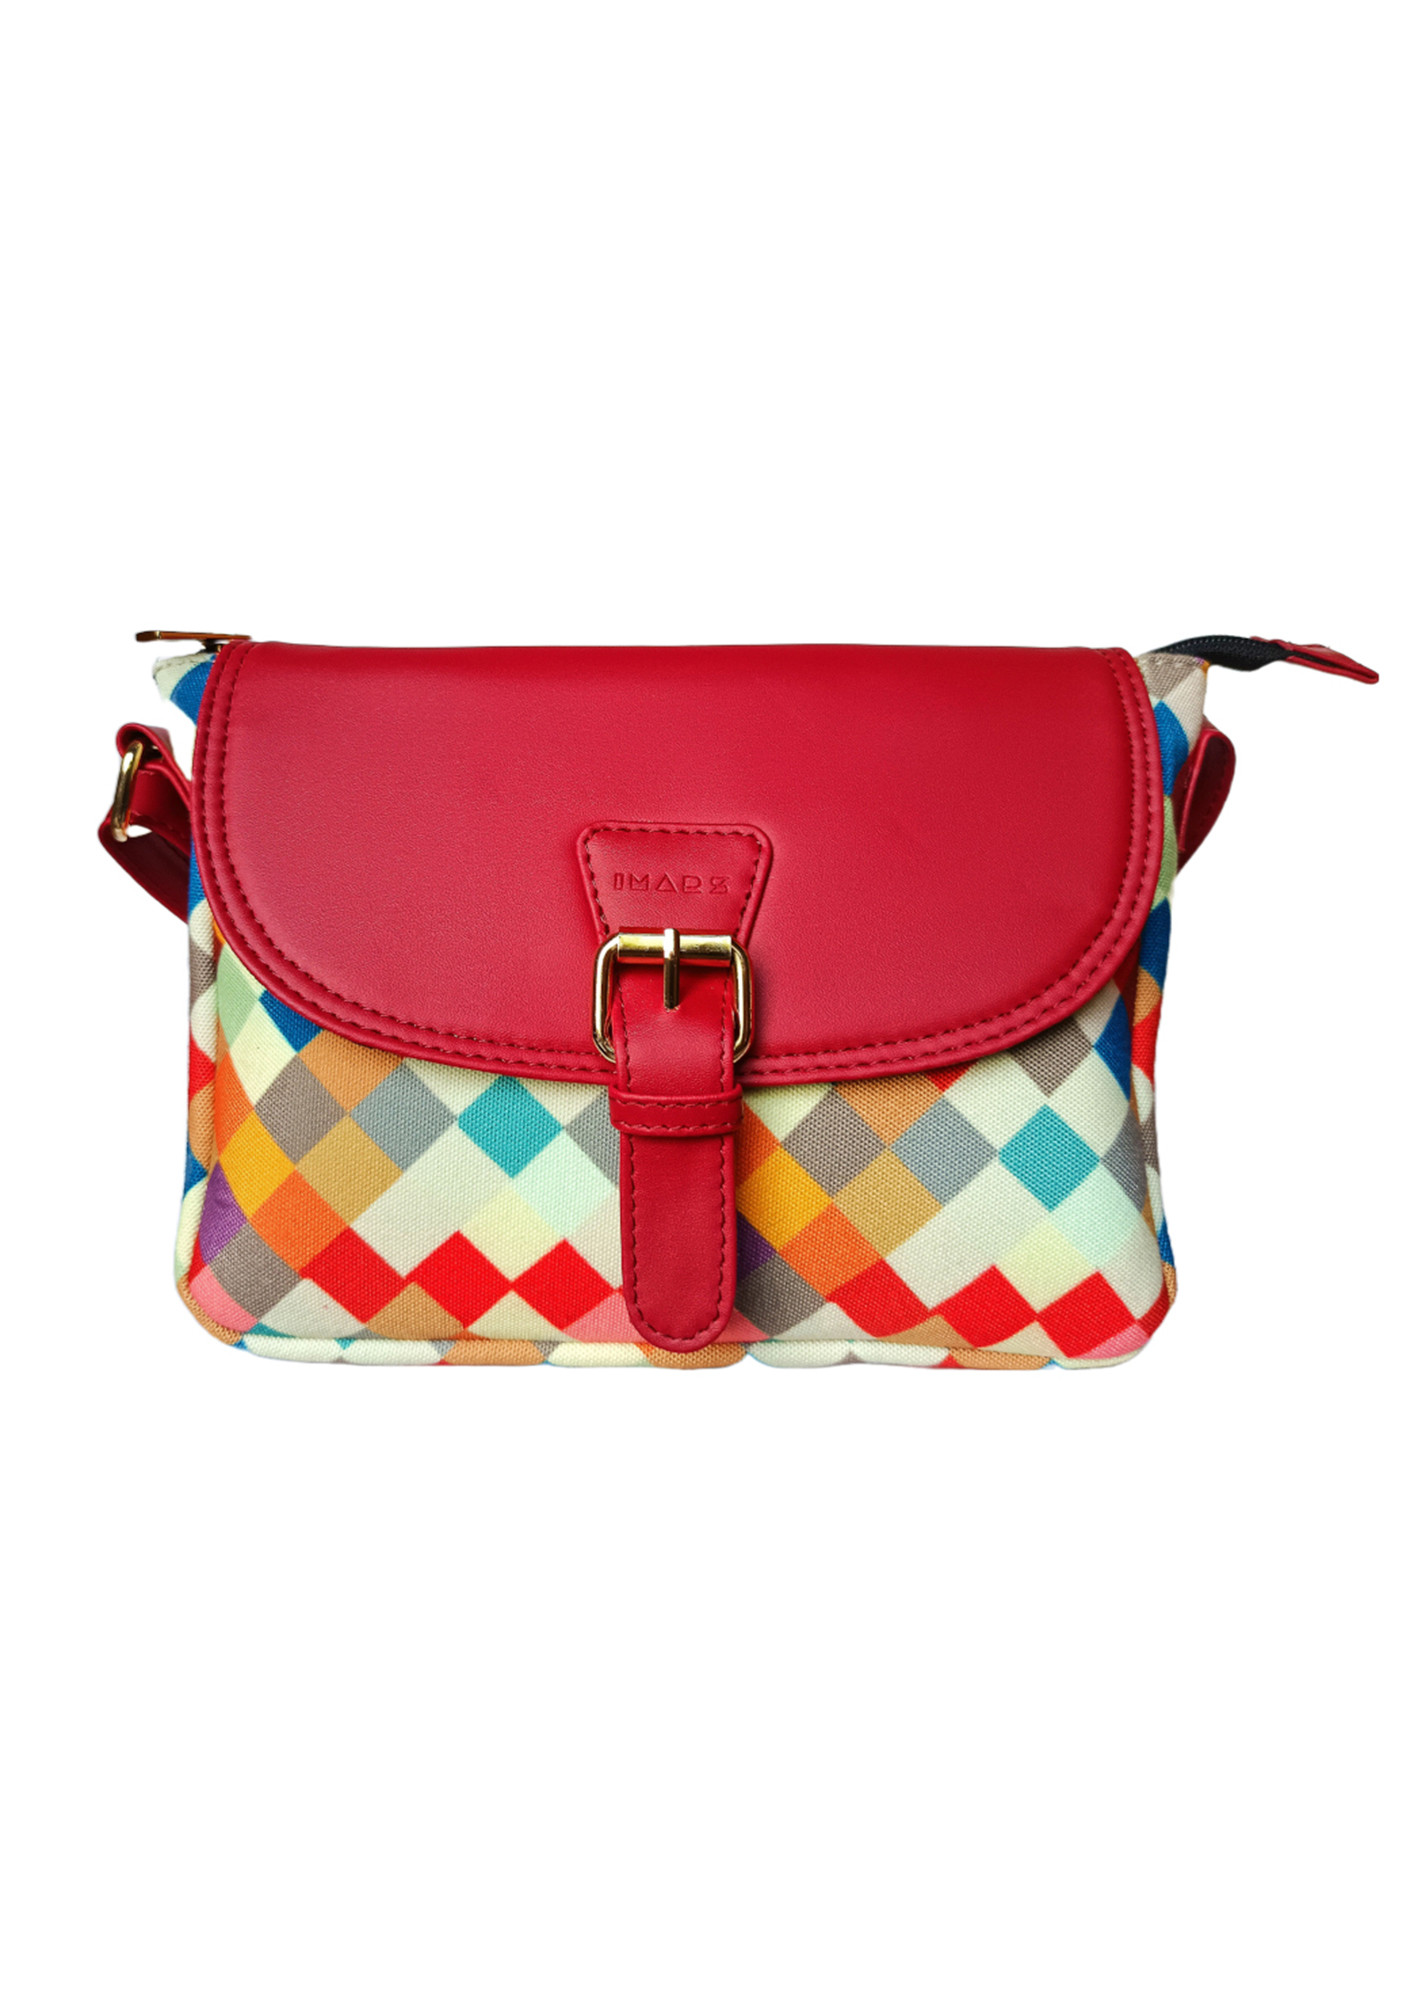 Imars Solid Red Printed Stylish Vegan Leather Crossbody For Girls With Adjustable Strap.-SB-08-R-C